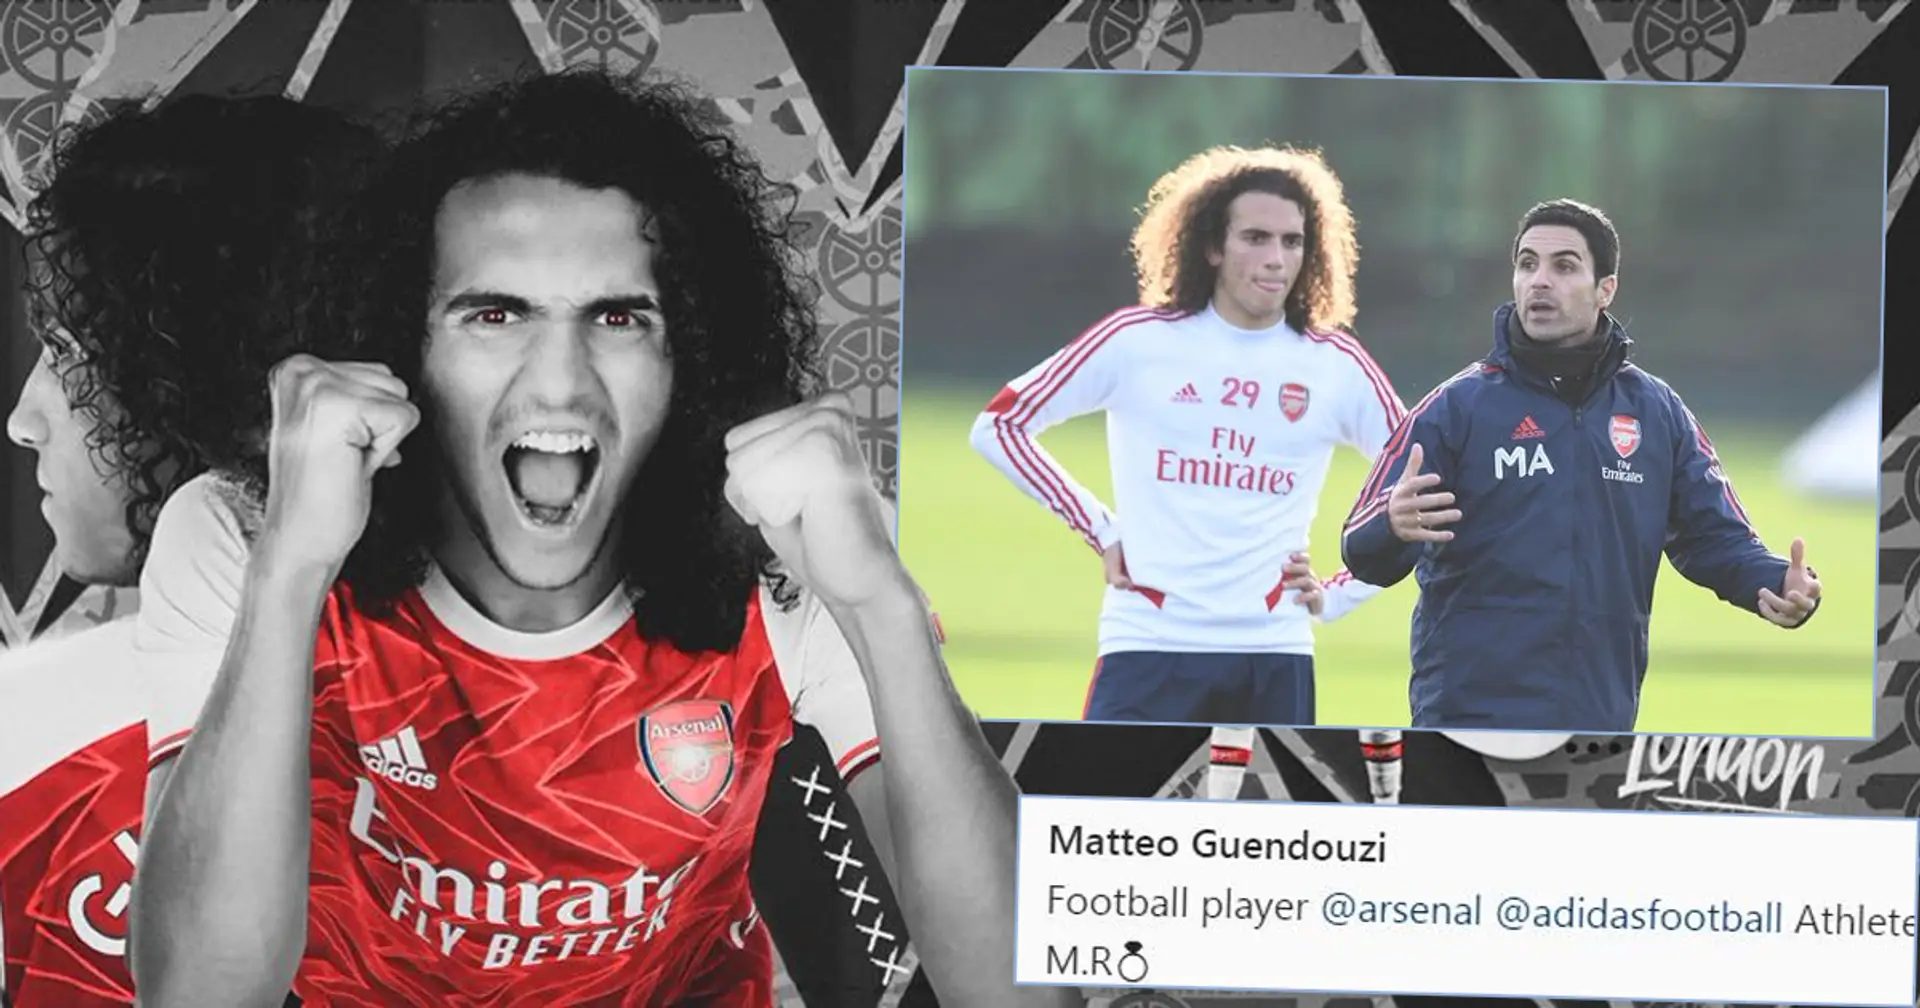 Guendouzi updates his social media accounts — fans think he's staying at Arsenal